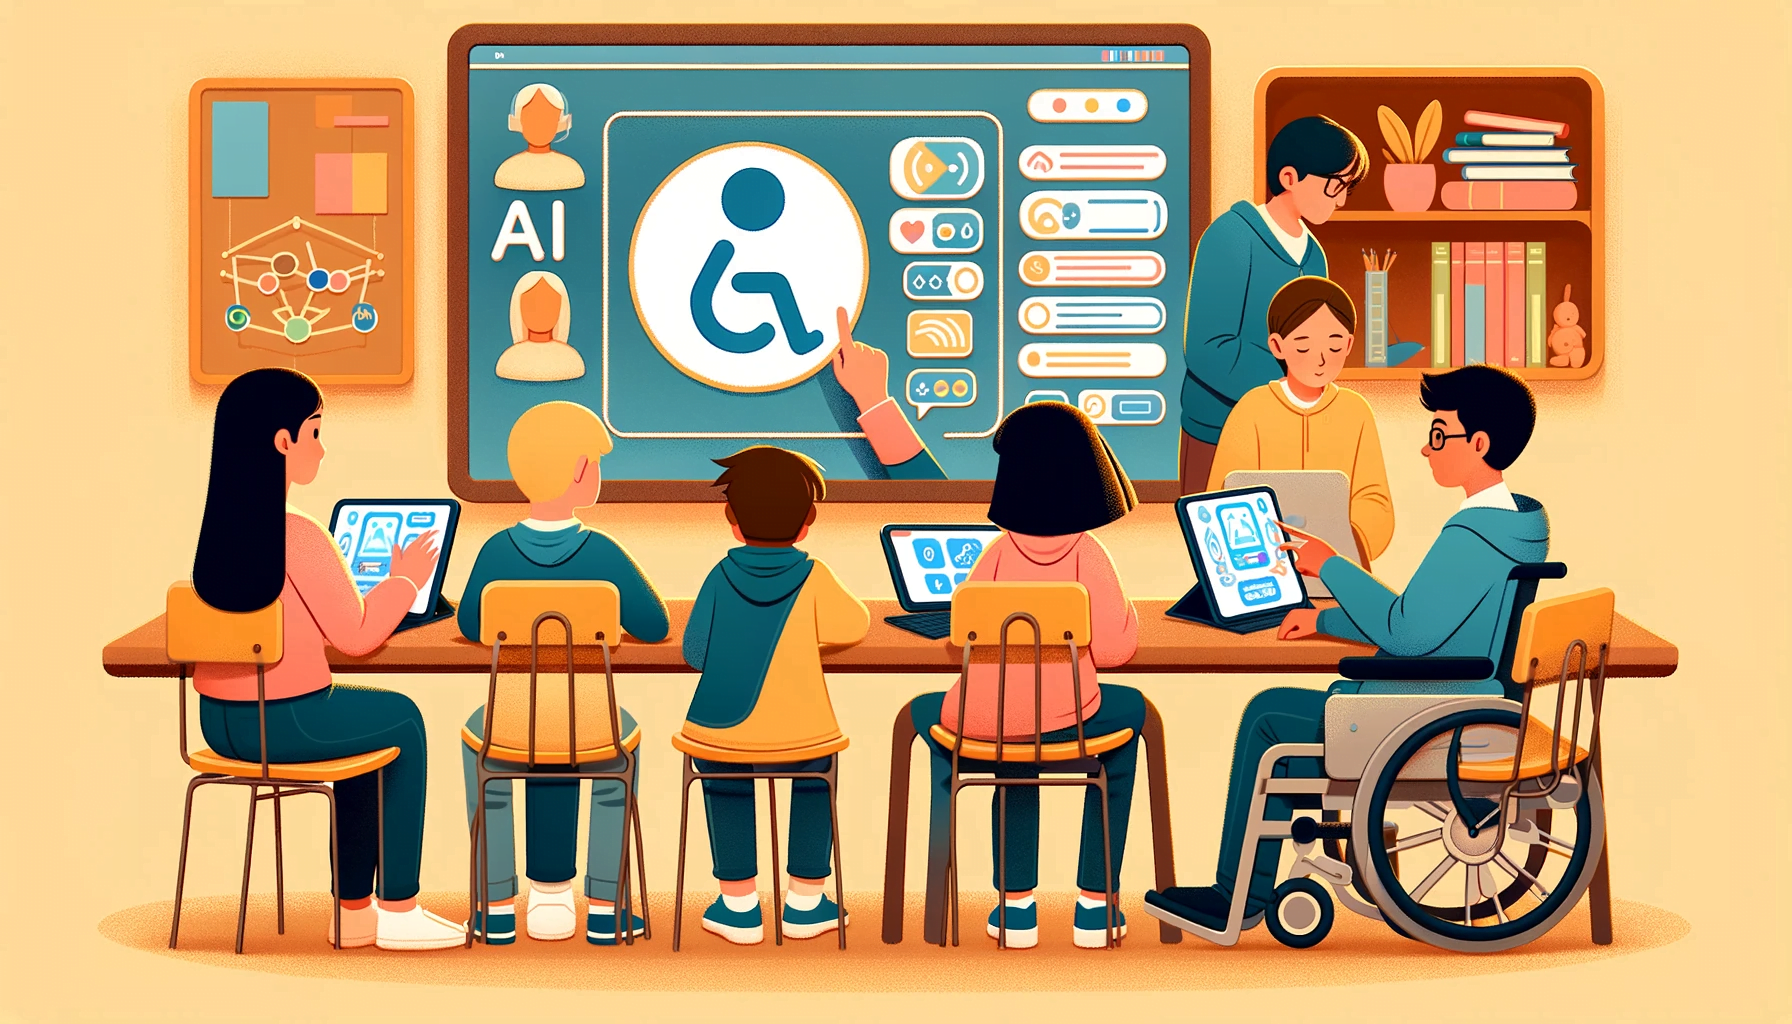 Inclusive classroom with students accessing AI tools through assistive technologies.